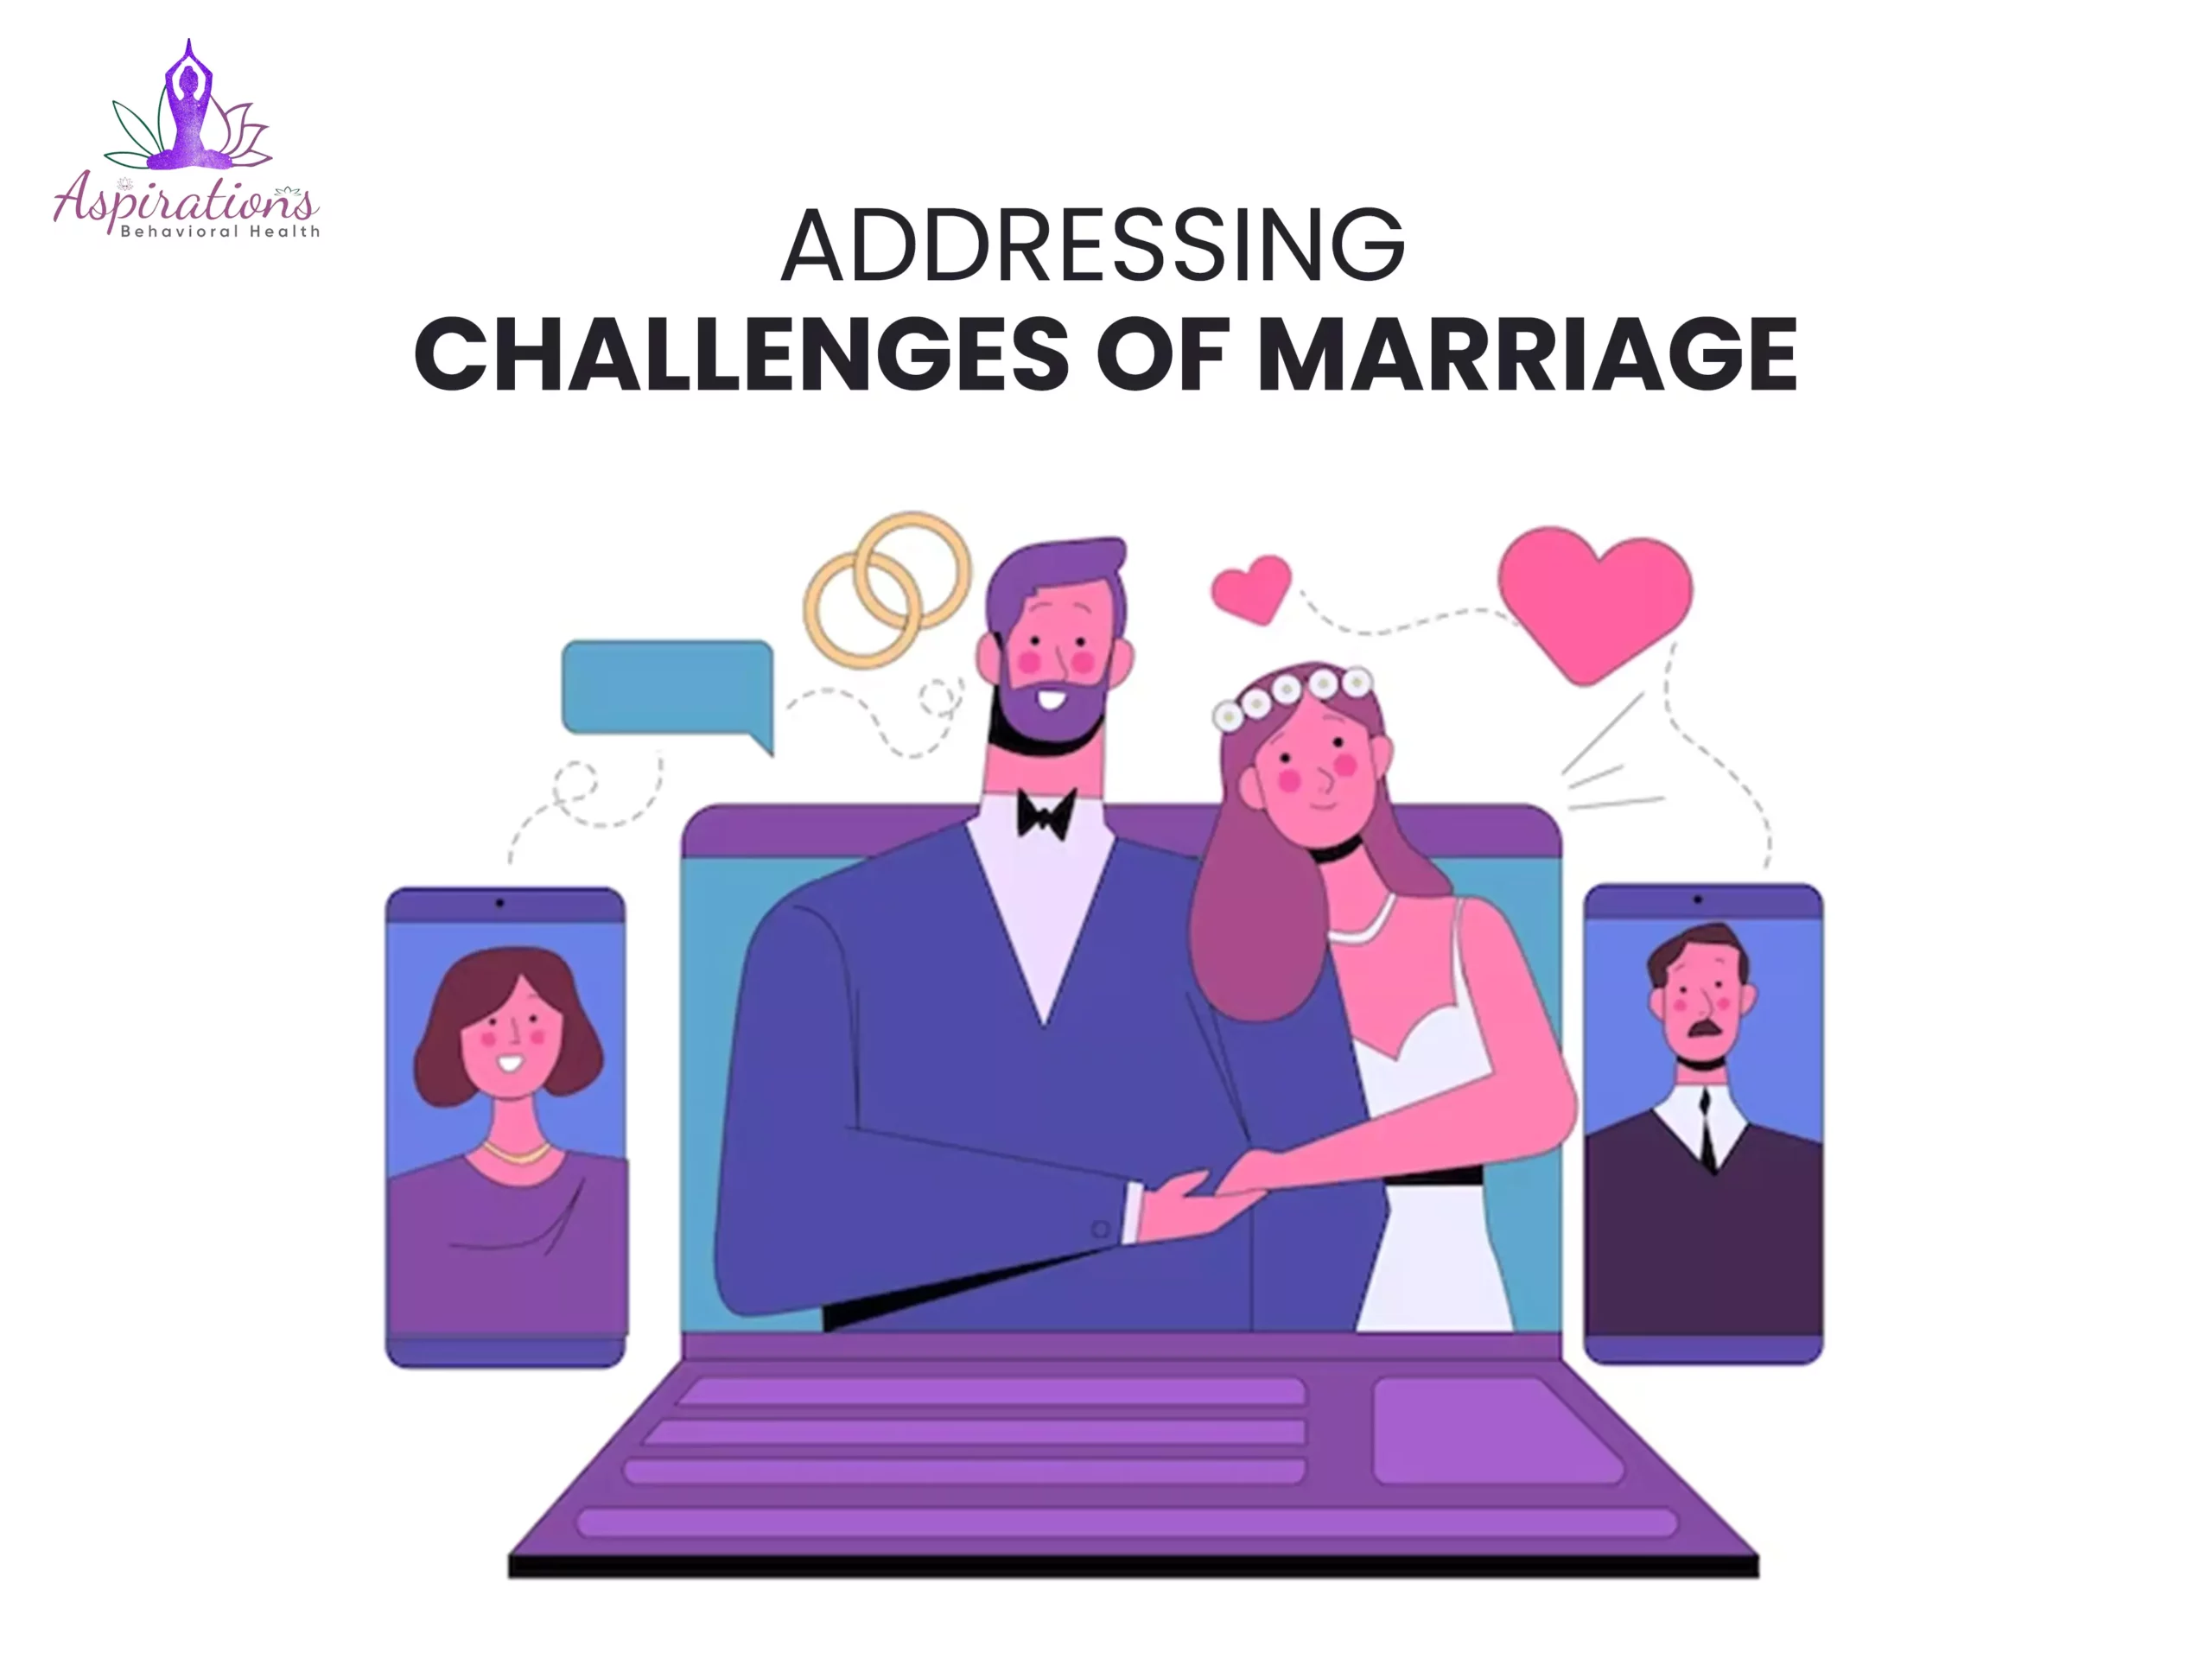 Addressing Challenges of Marriage